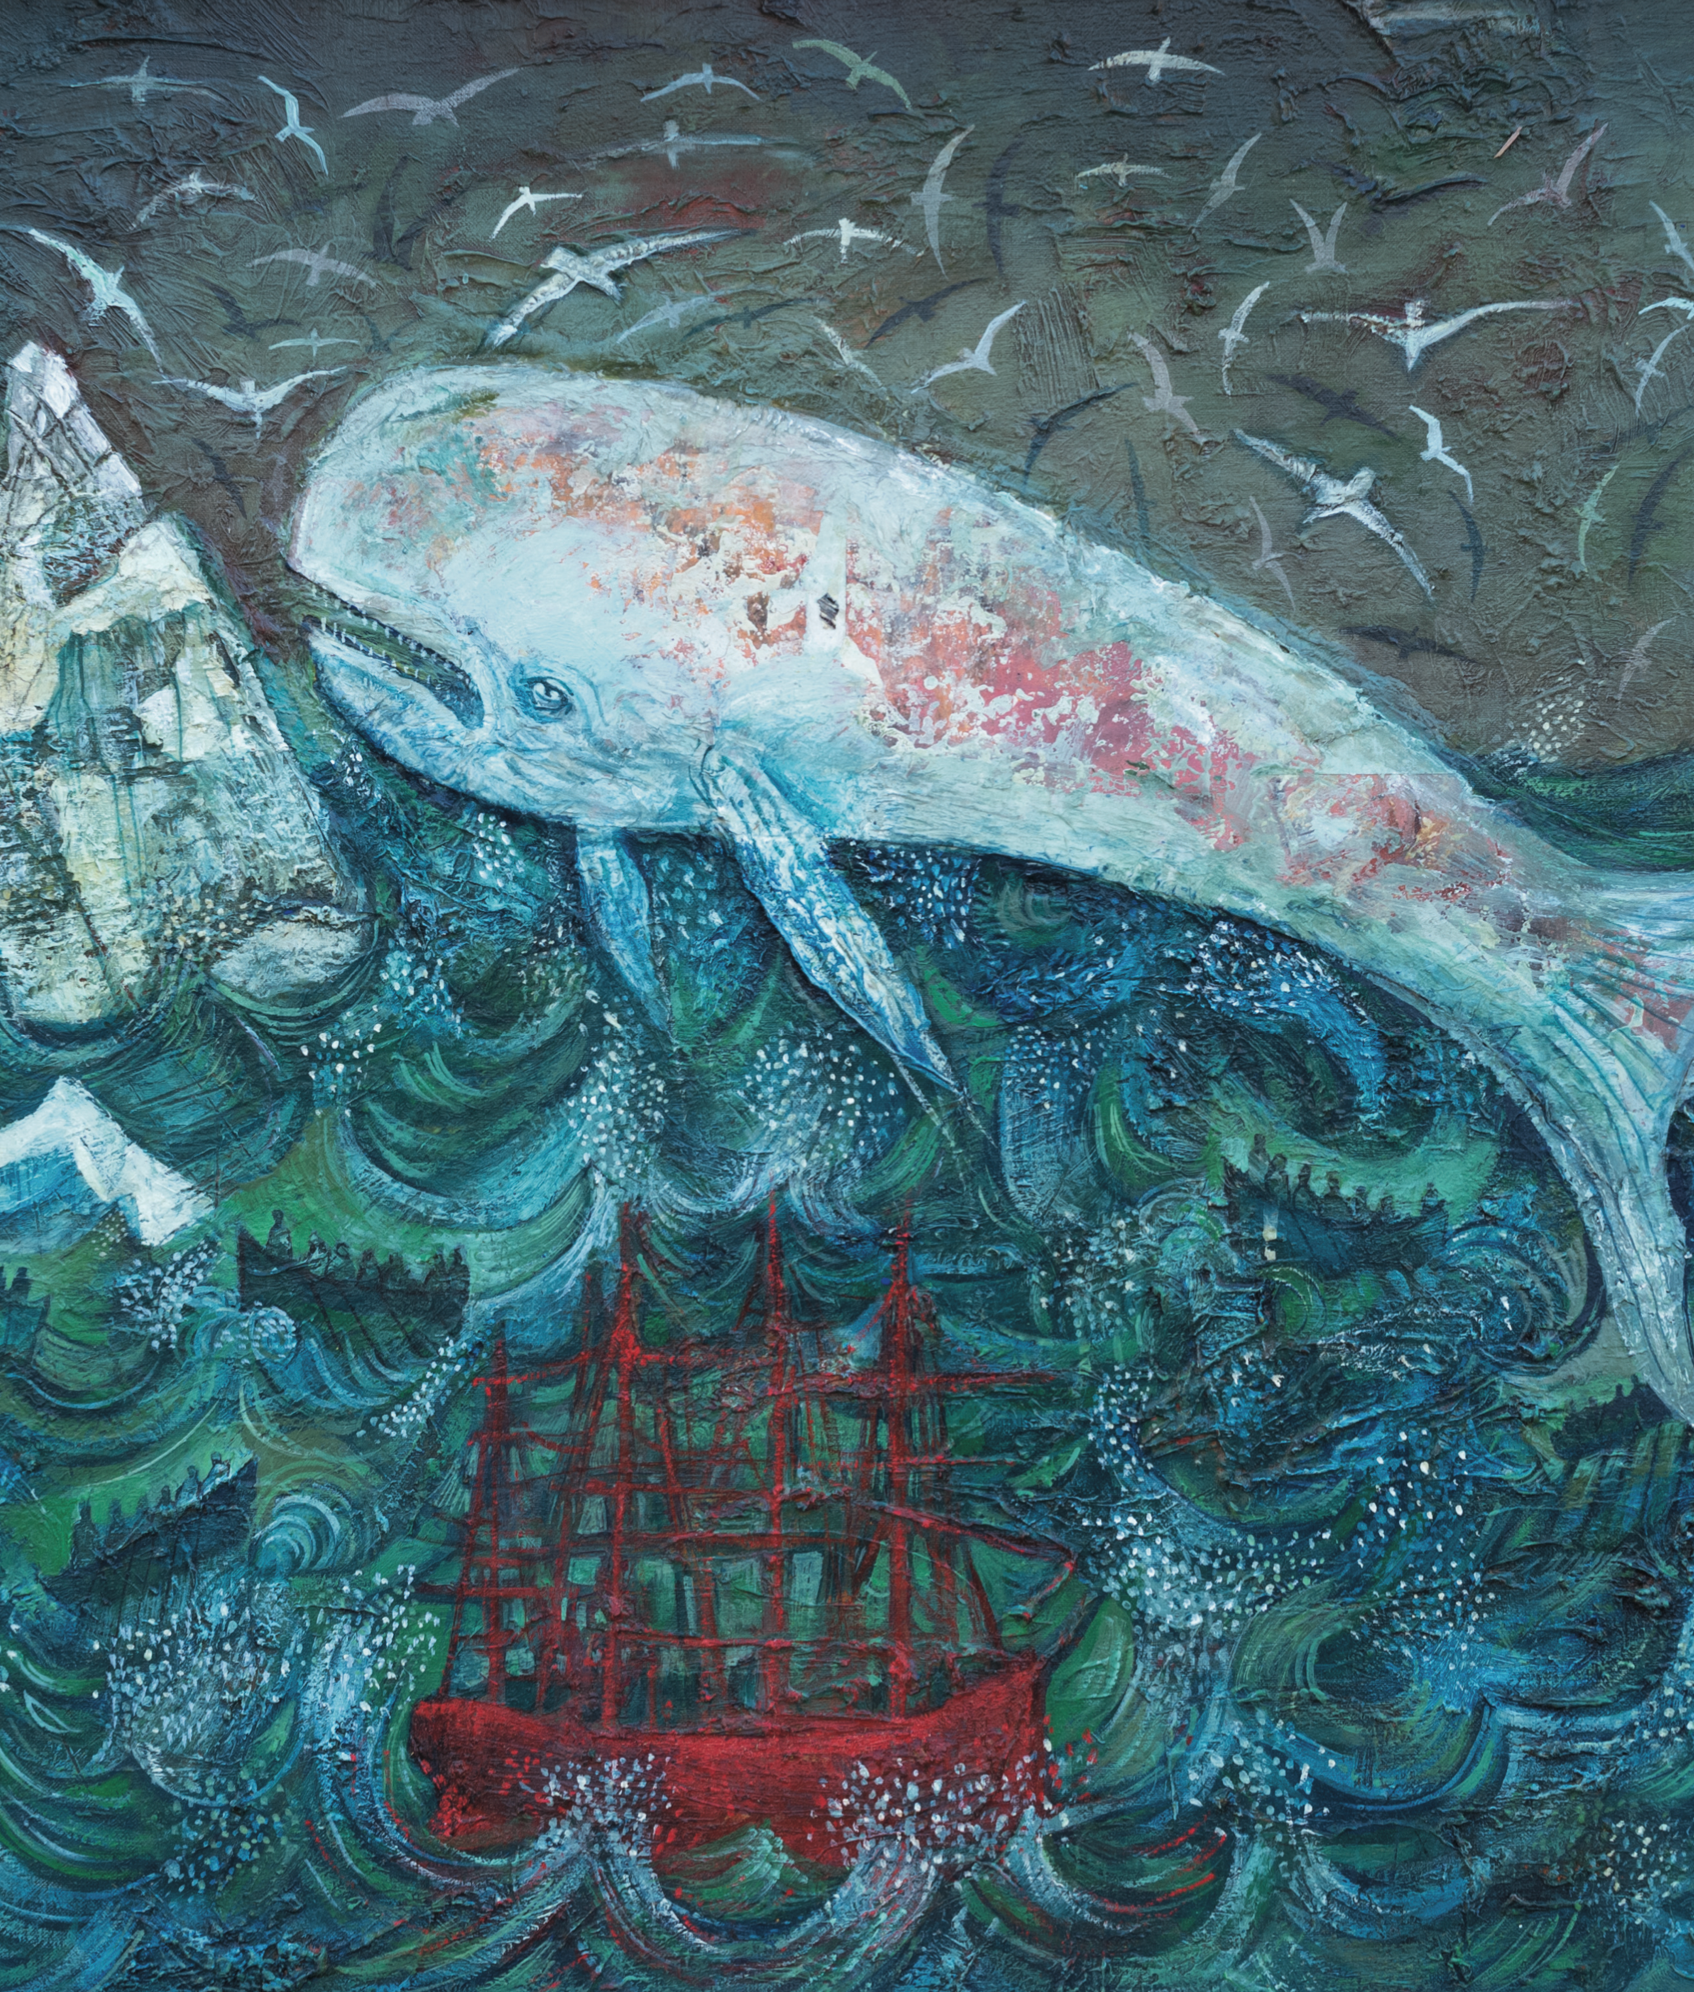 The Whale V, oil on canvas, 2001